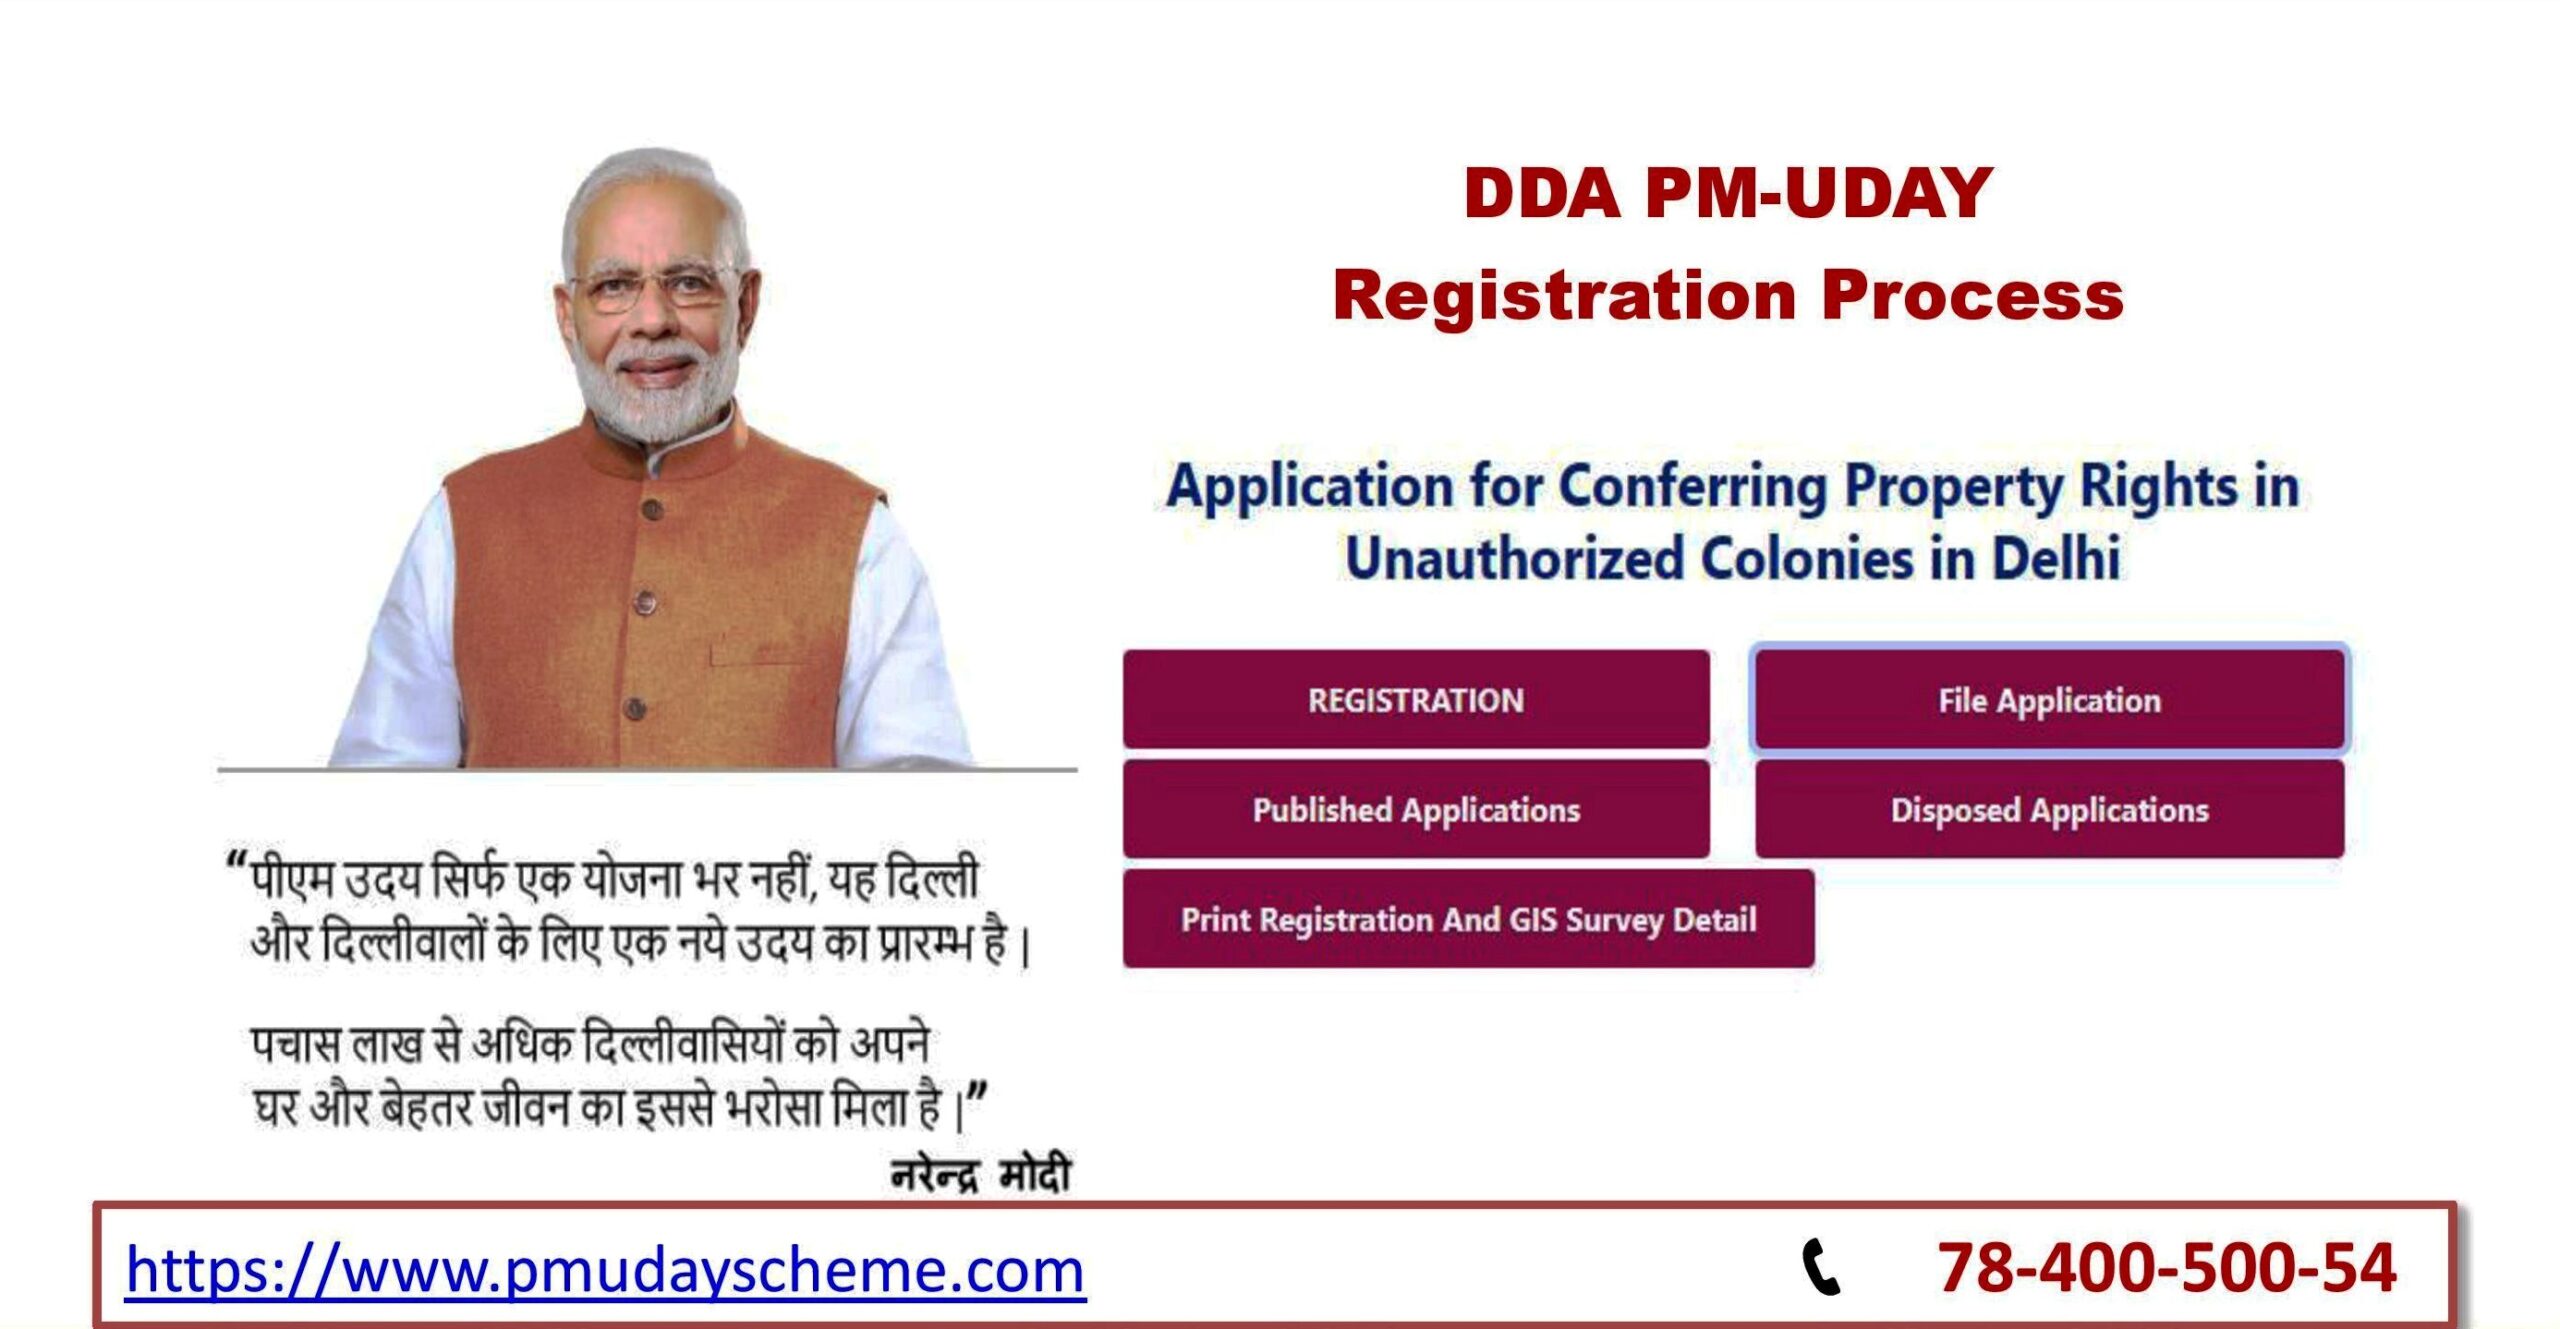 What Is The Process of PM Uday Registration | pmudayscheme.com